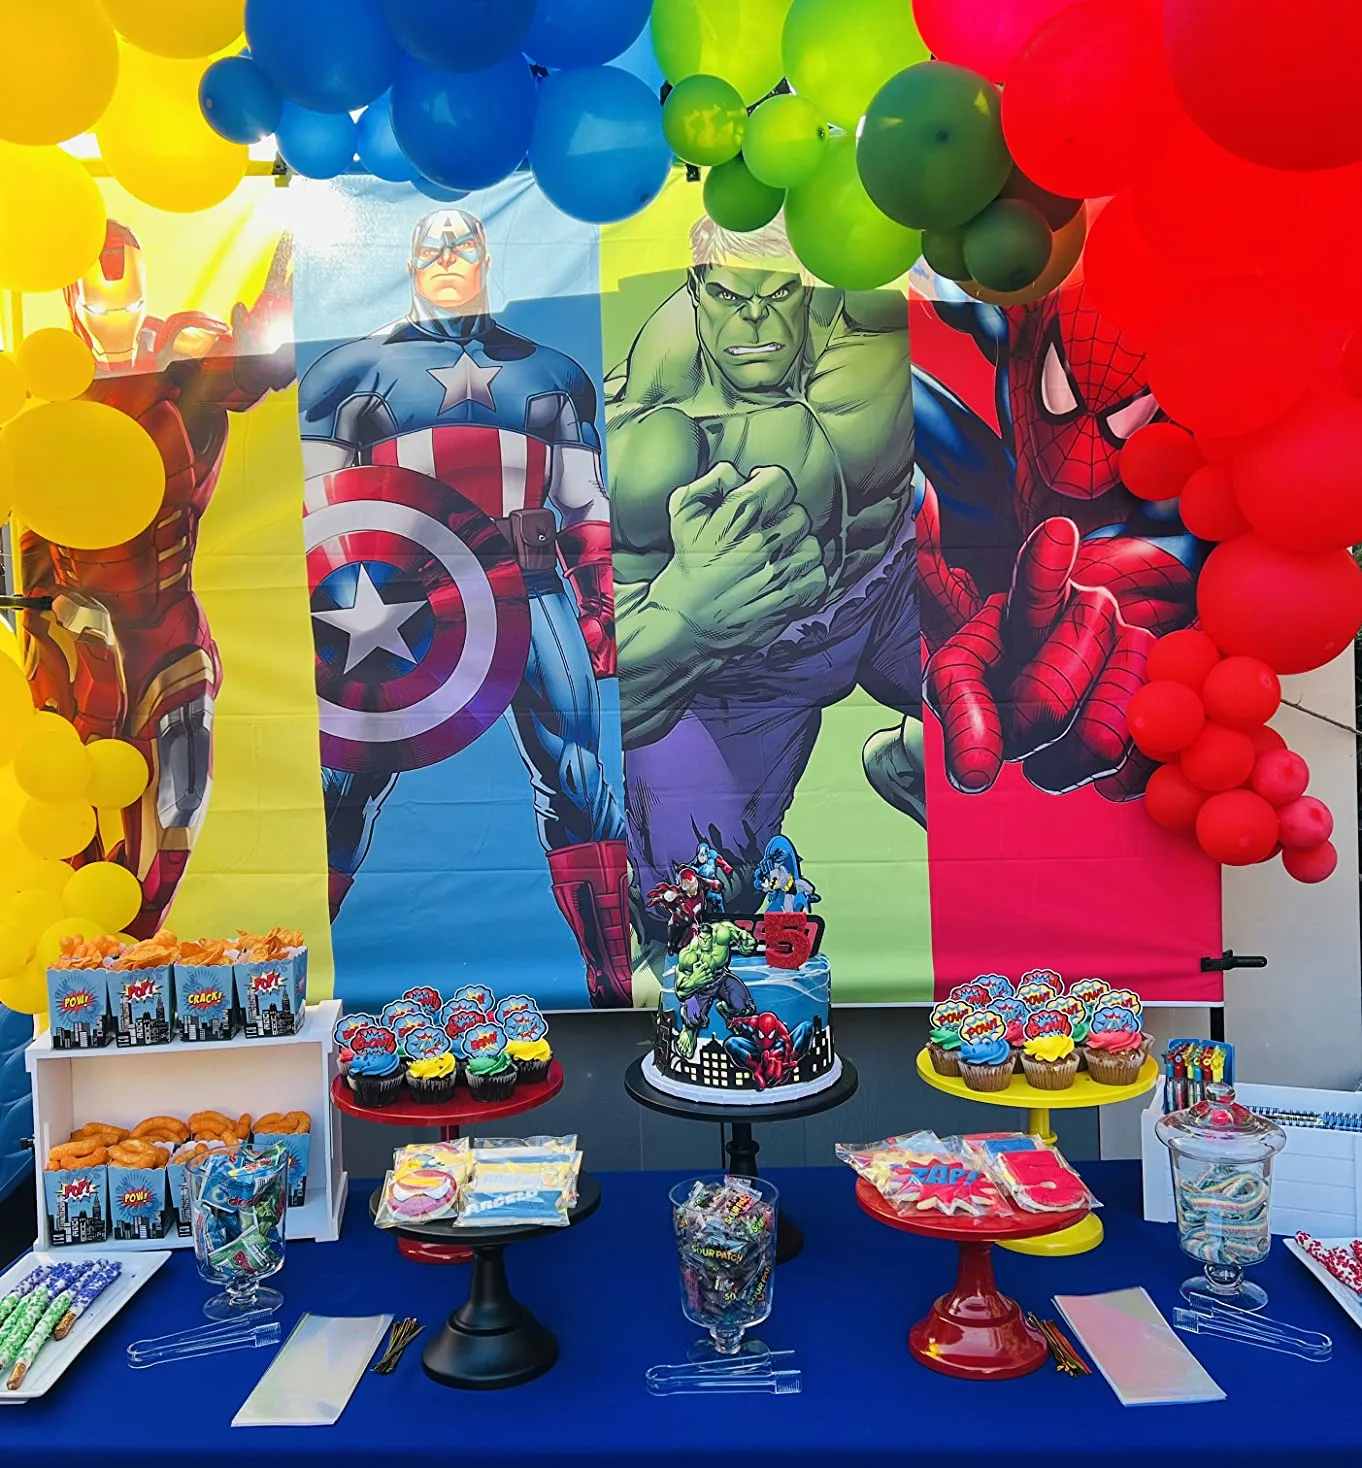 Colorful Banner 5 Cake Topper Blue Tablecloth Angle View Avengers Birthday Party